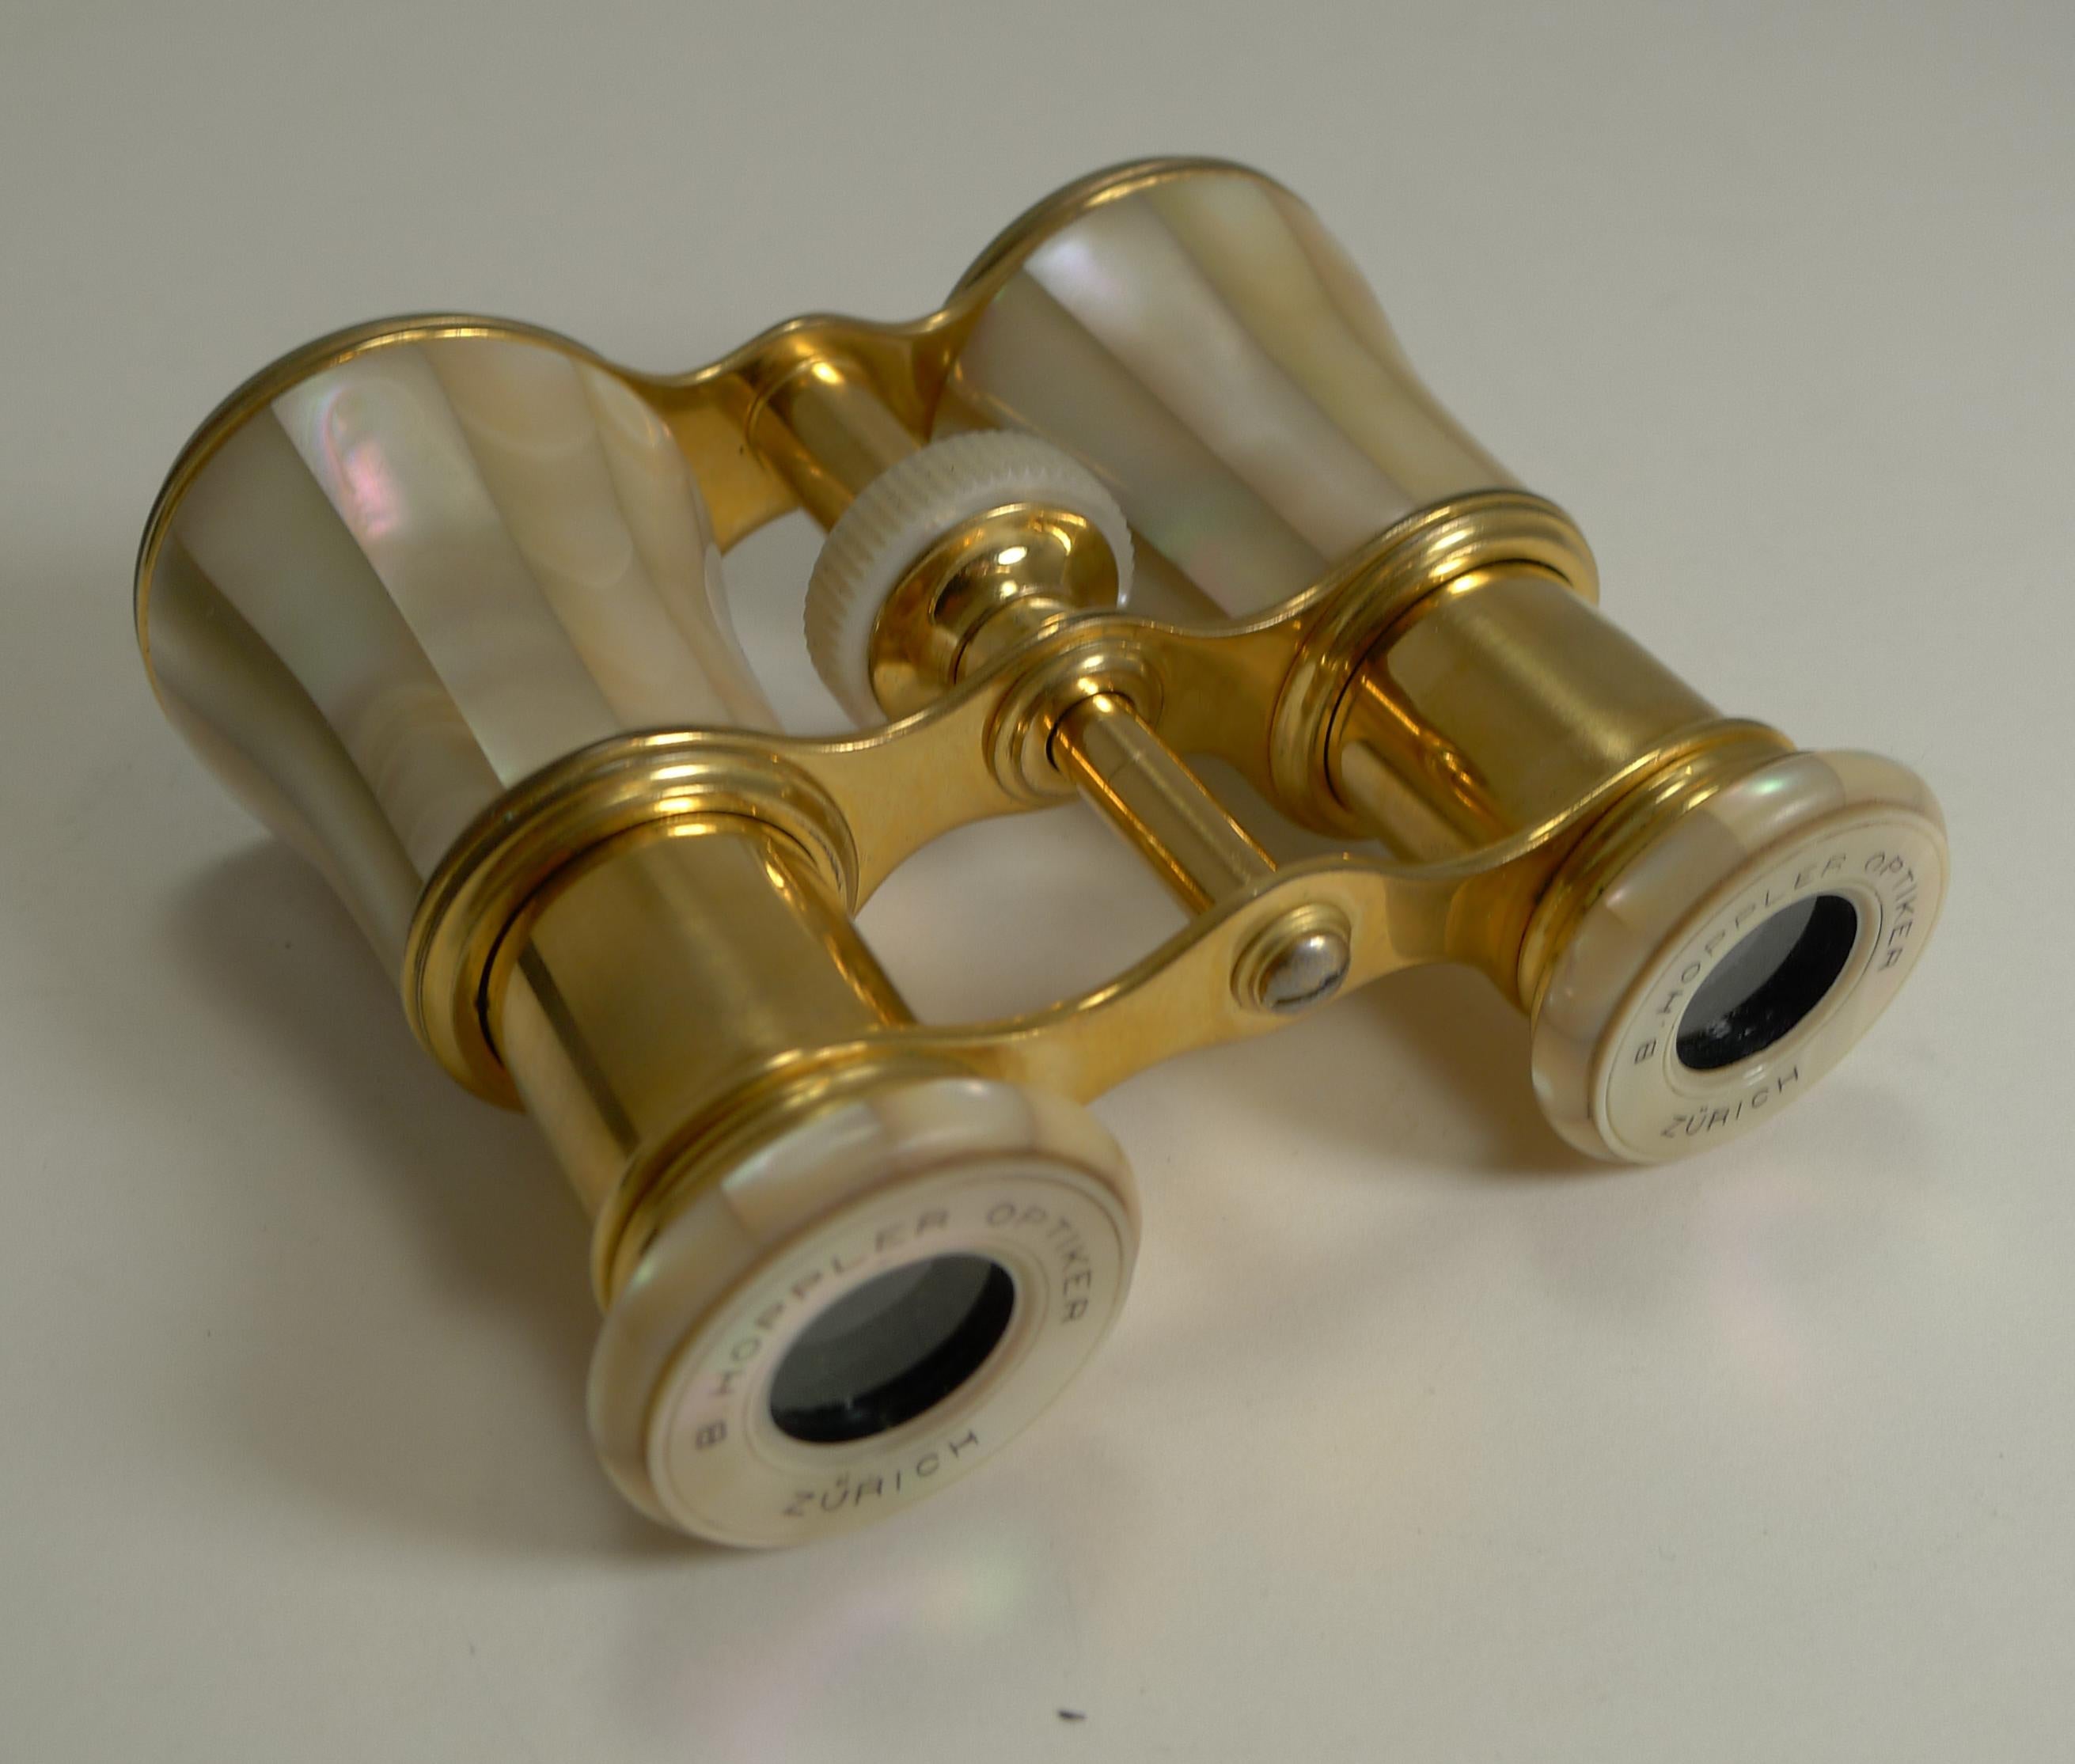 Mother-of-Pearl Pair of Antique Mother of Pearl Opera Glasses by Lemaire, Paris circa 1890